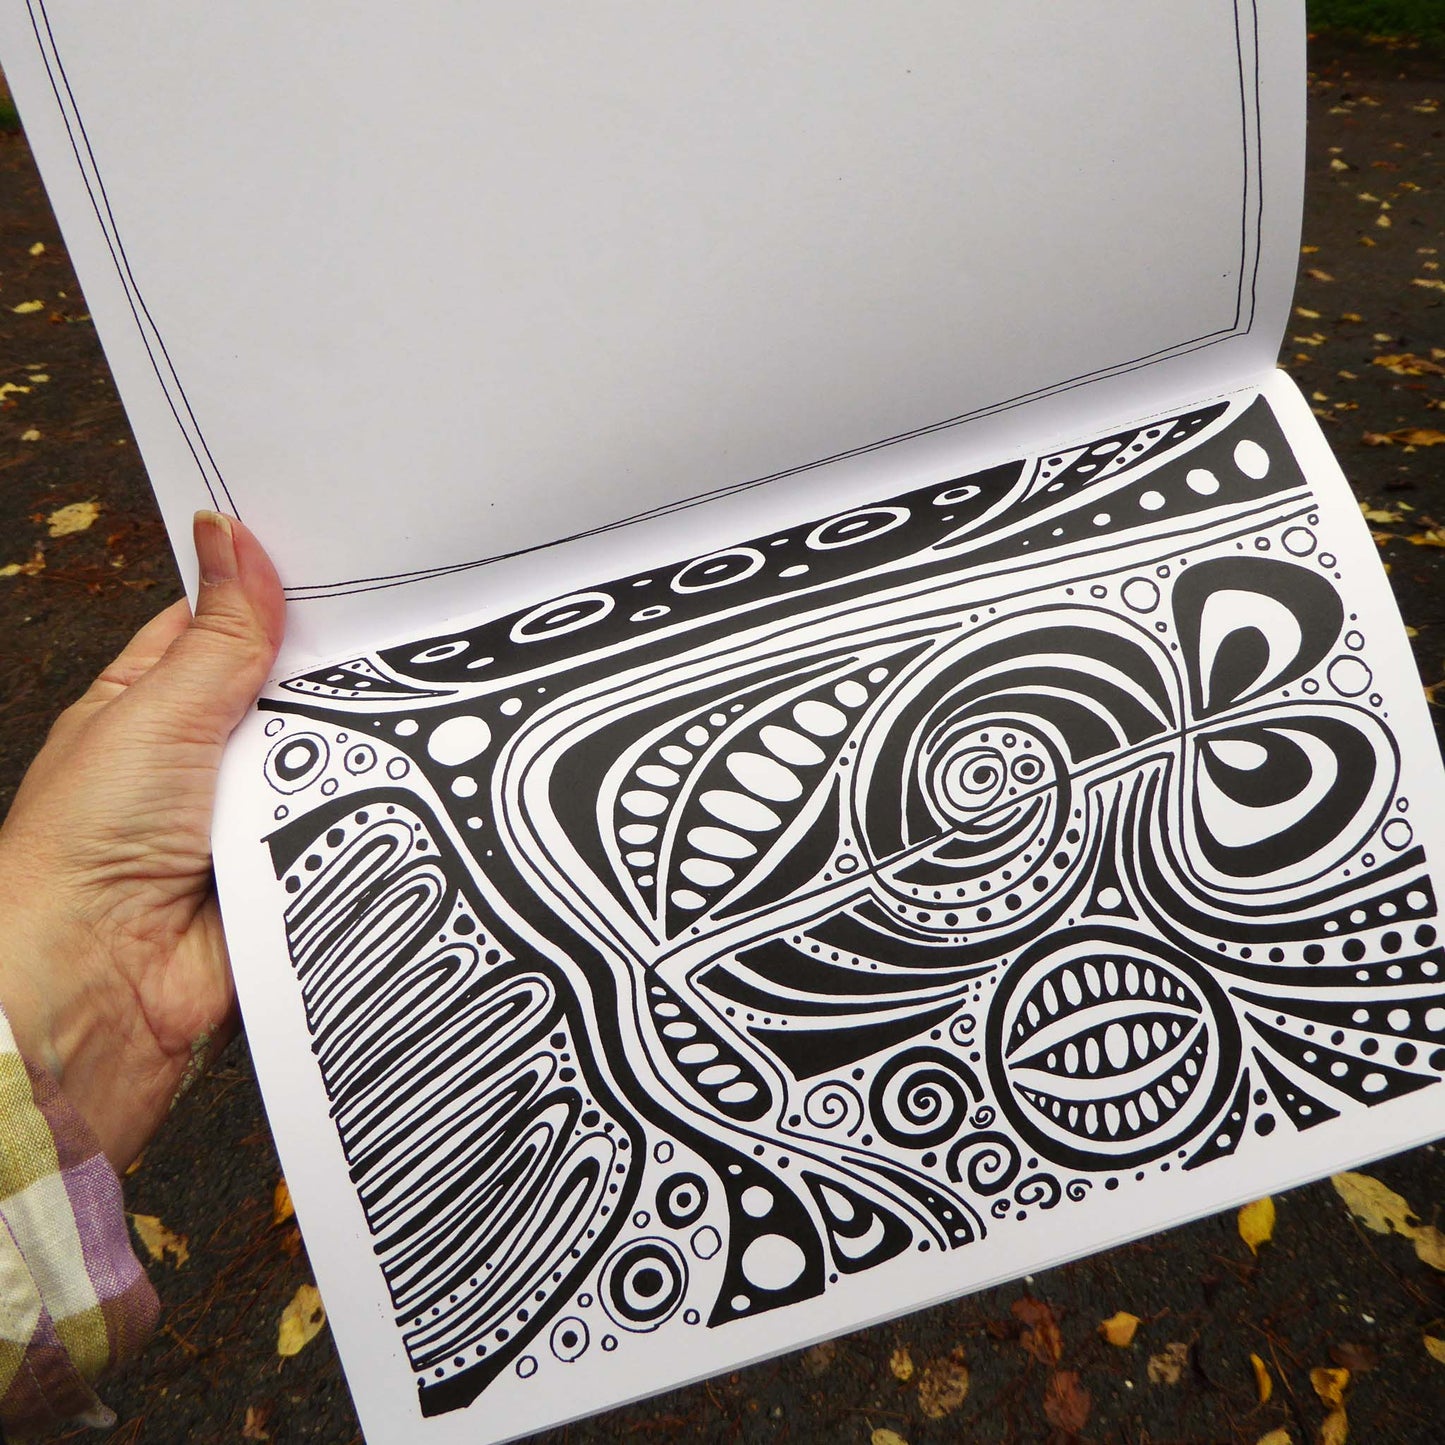 Colouring book - For adults and children - Volume 2 - by Norfolk based artist Debbie Osborn - Handmade